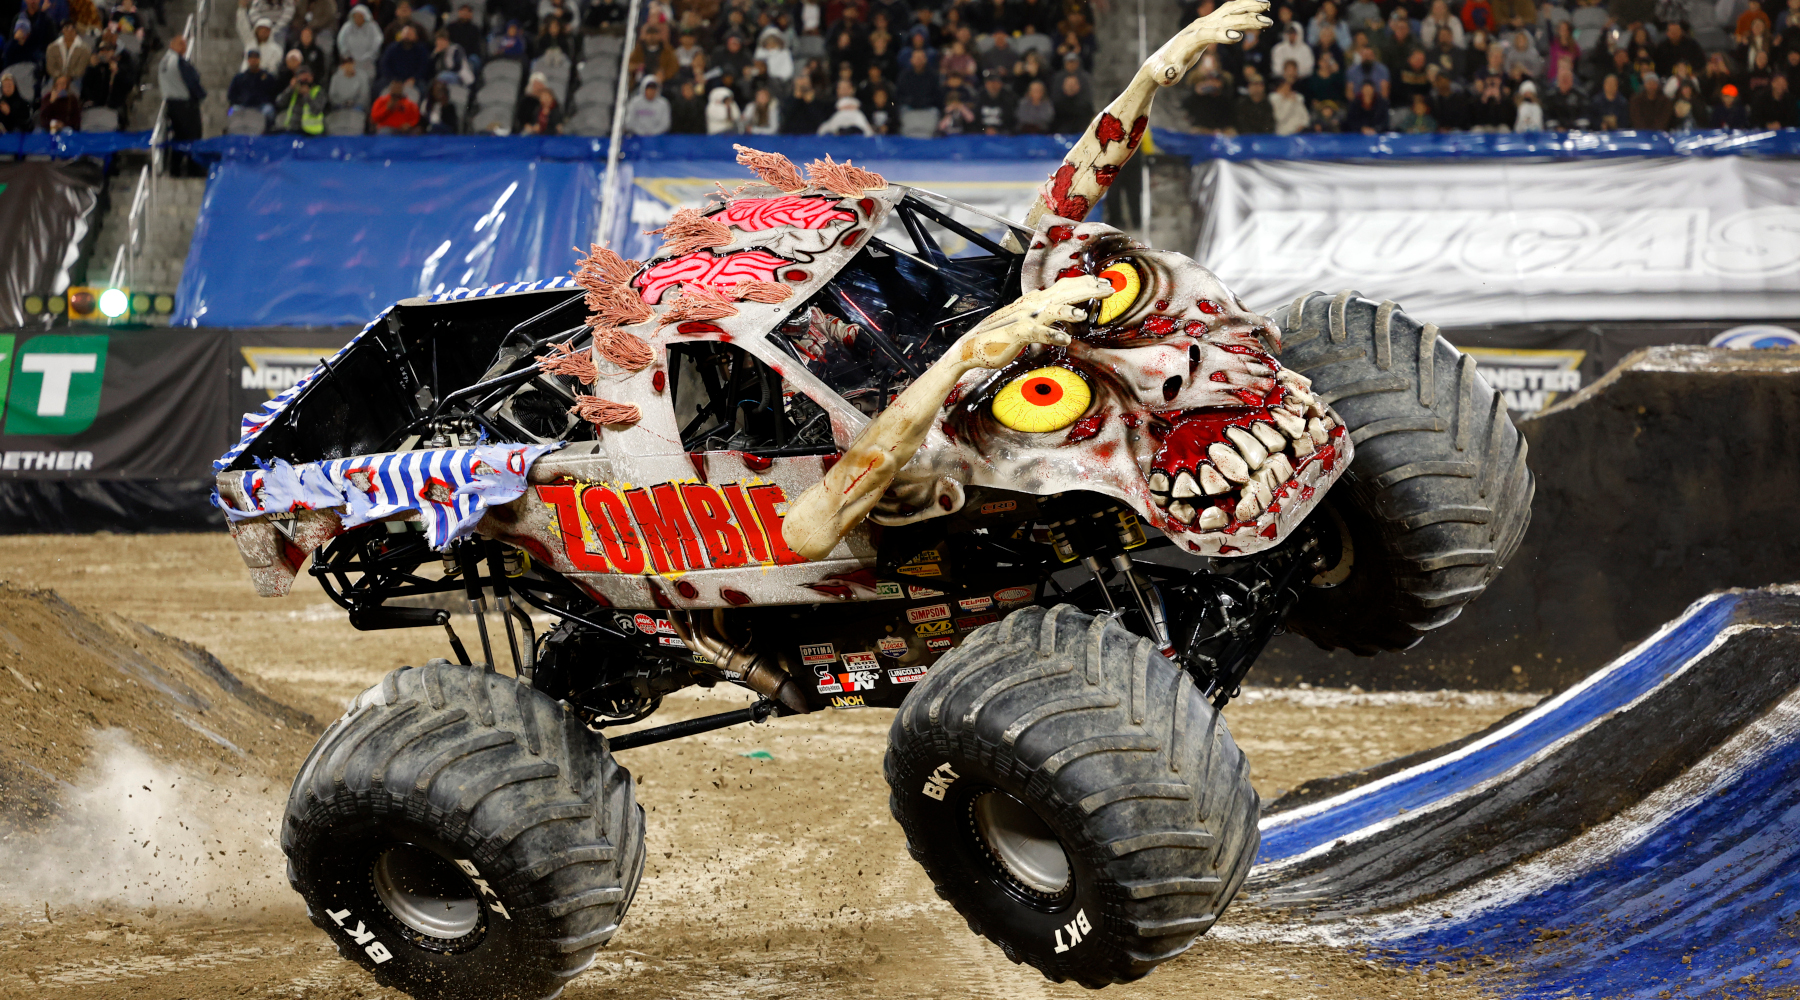 St. Cloud Home to Largest Collection of Monster Trucks in USA